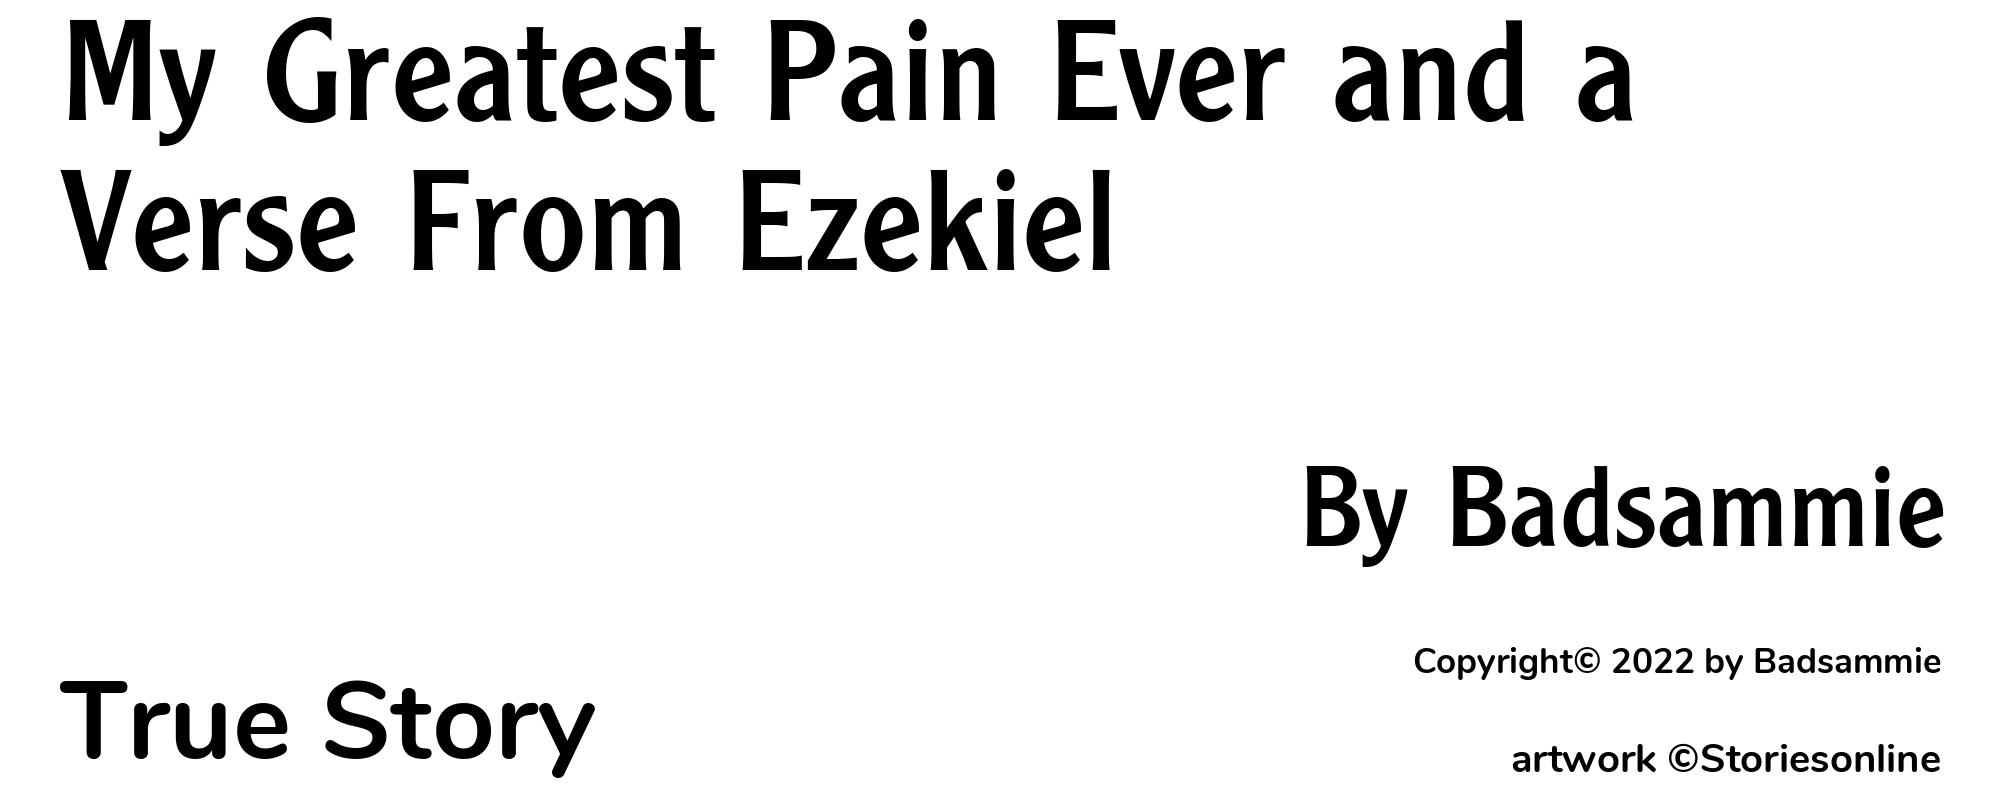 My Greatest Pain Ever and a Verse From Ezekiel - Cover